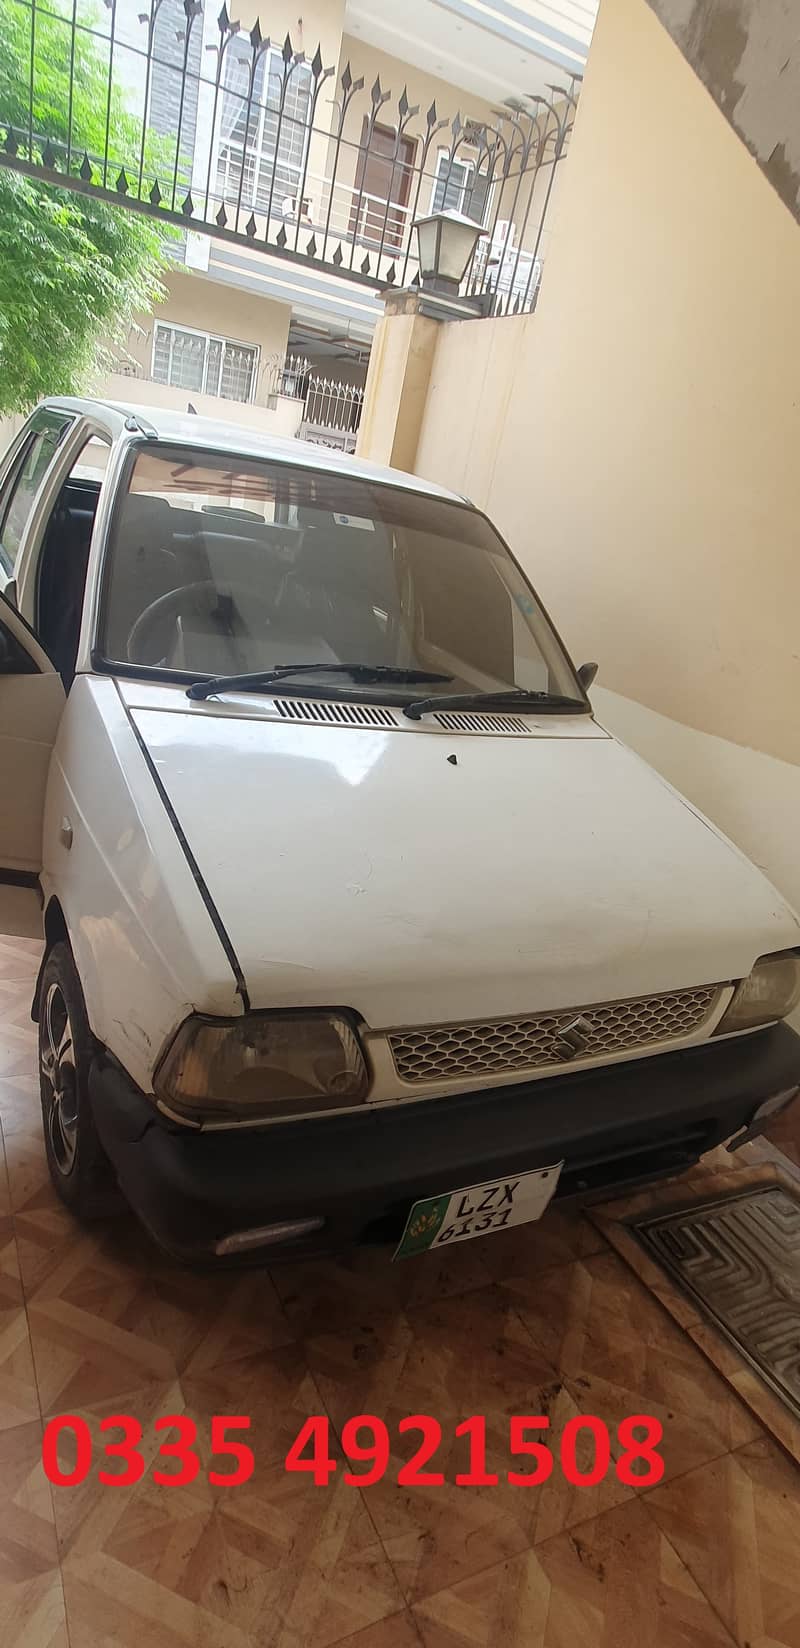 Family Used Mehran Car for Sale in Lahore - urgent 4